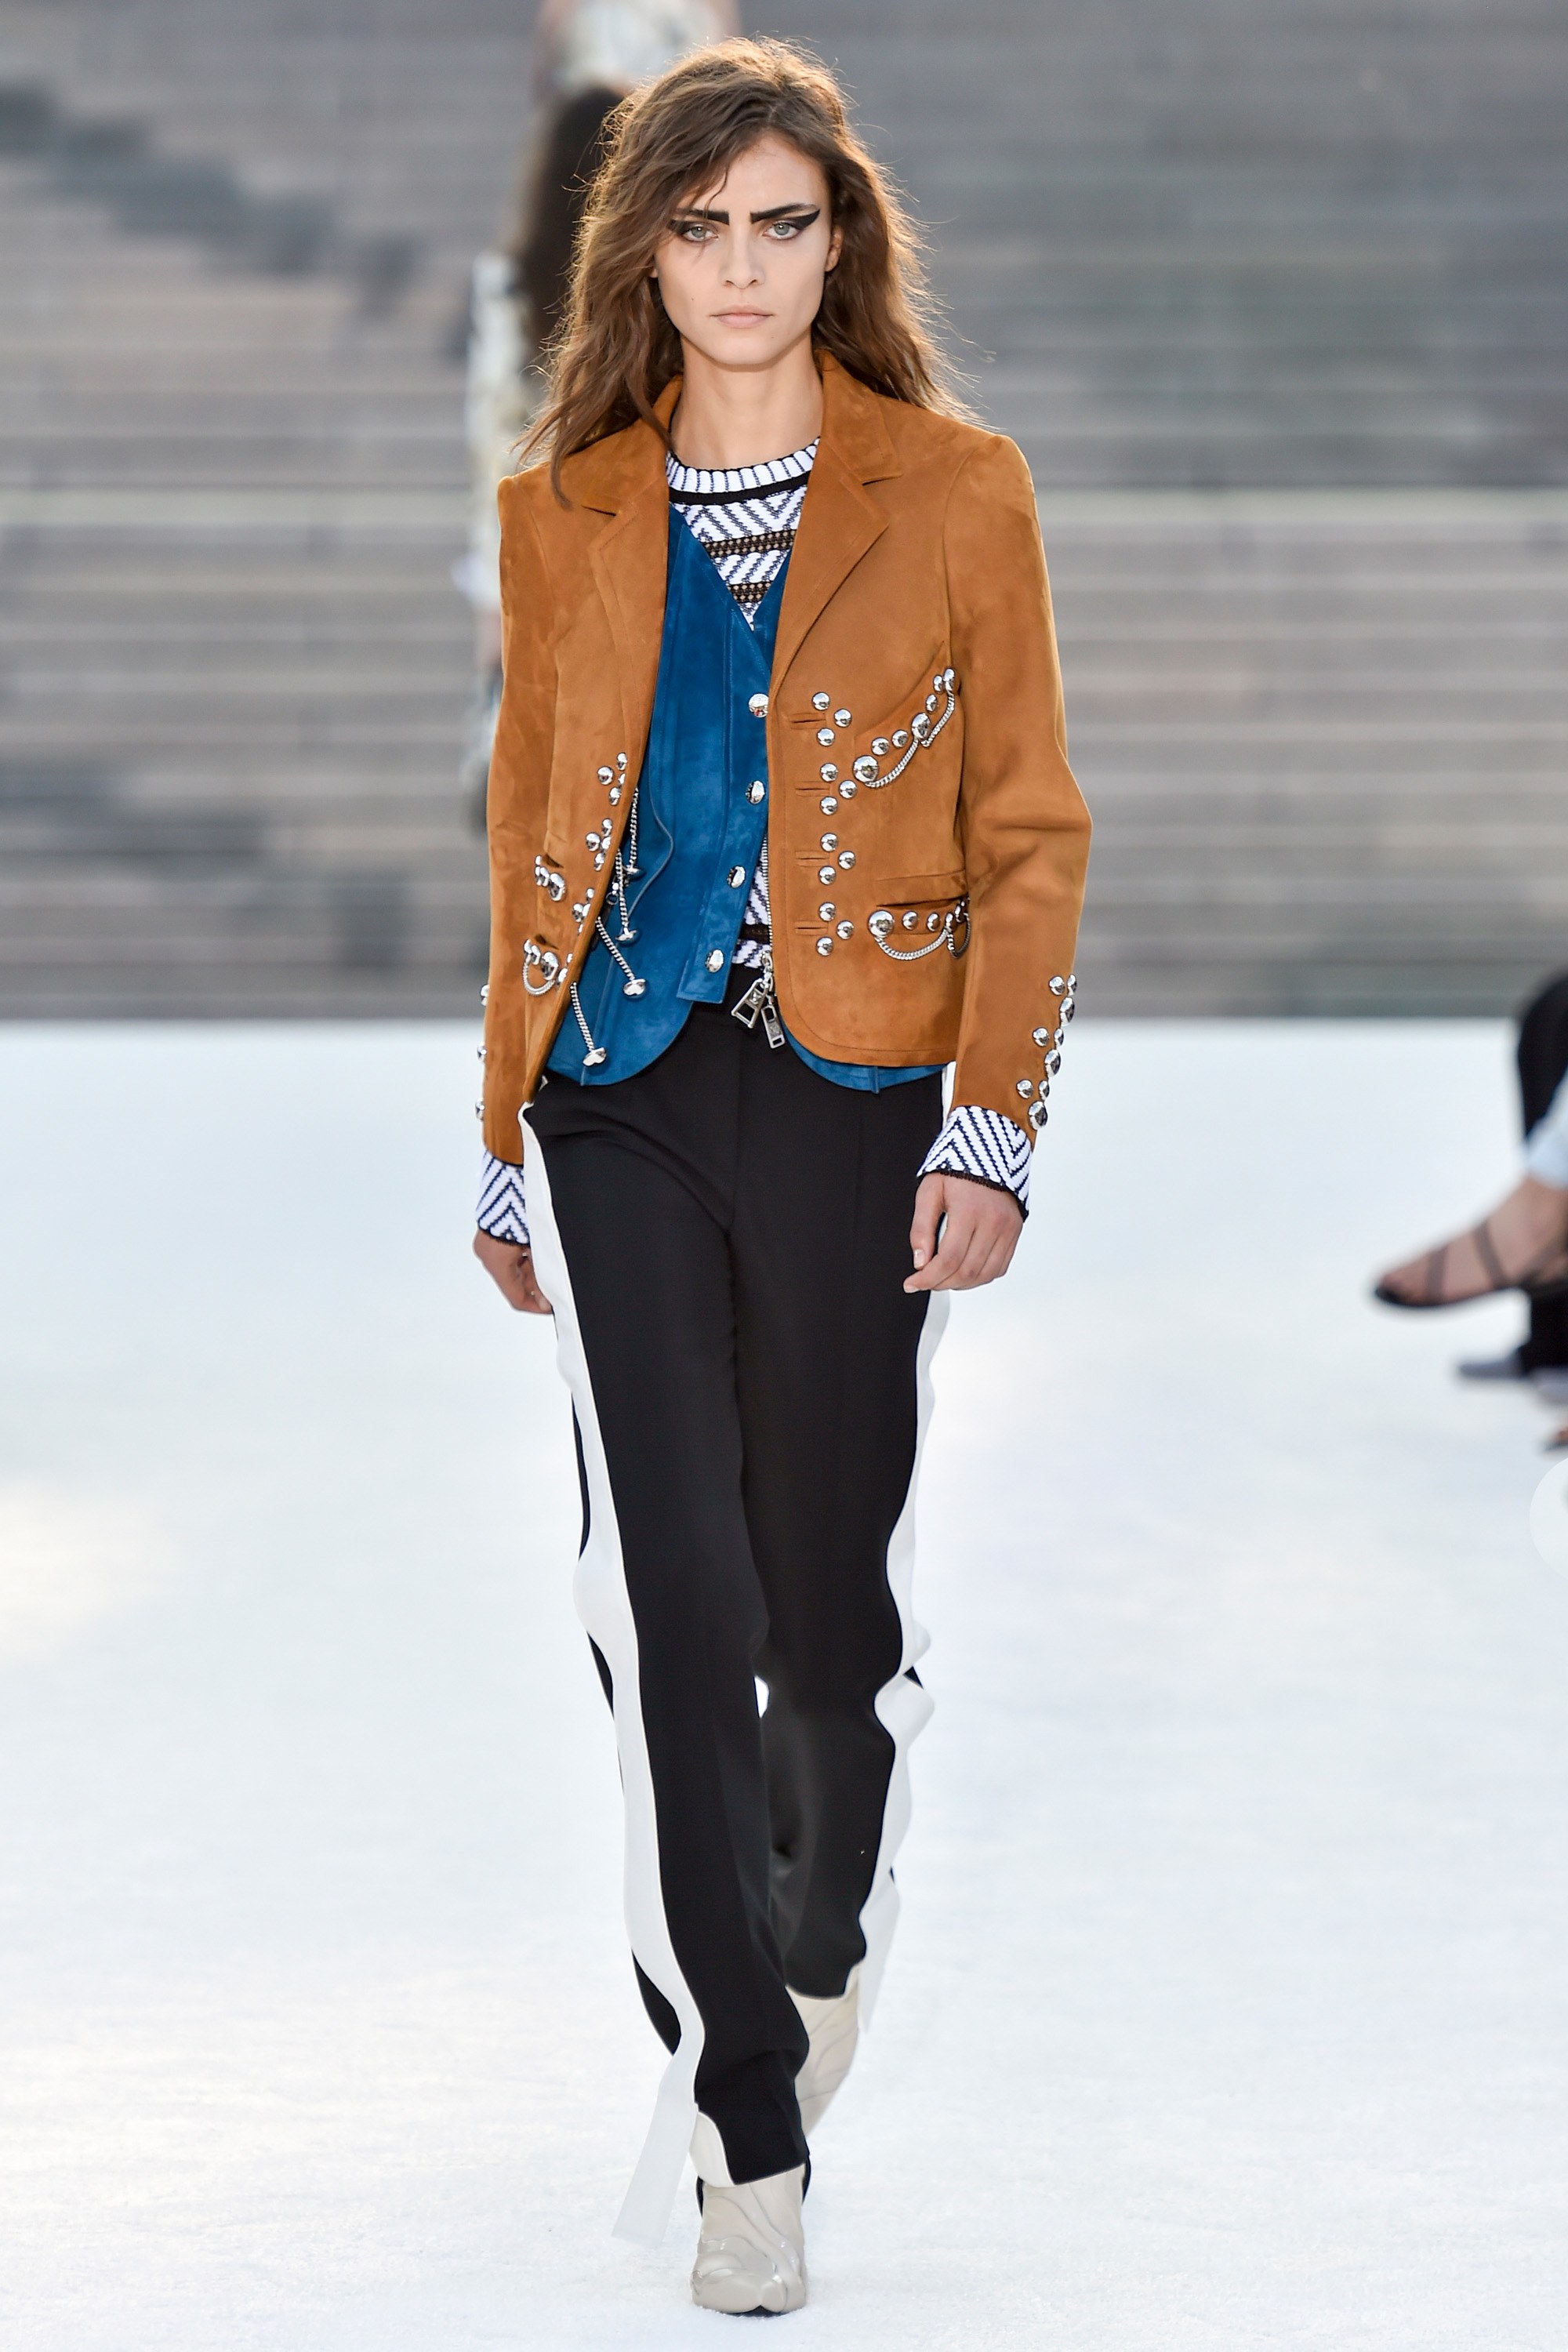 Photo #1a005 from Louis Vuitton Cruise 2018